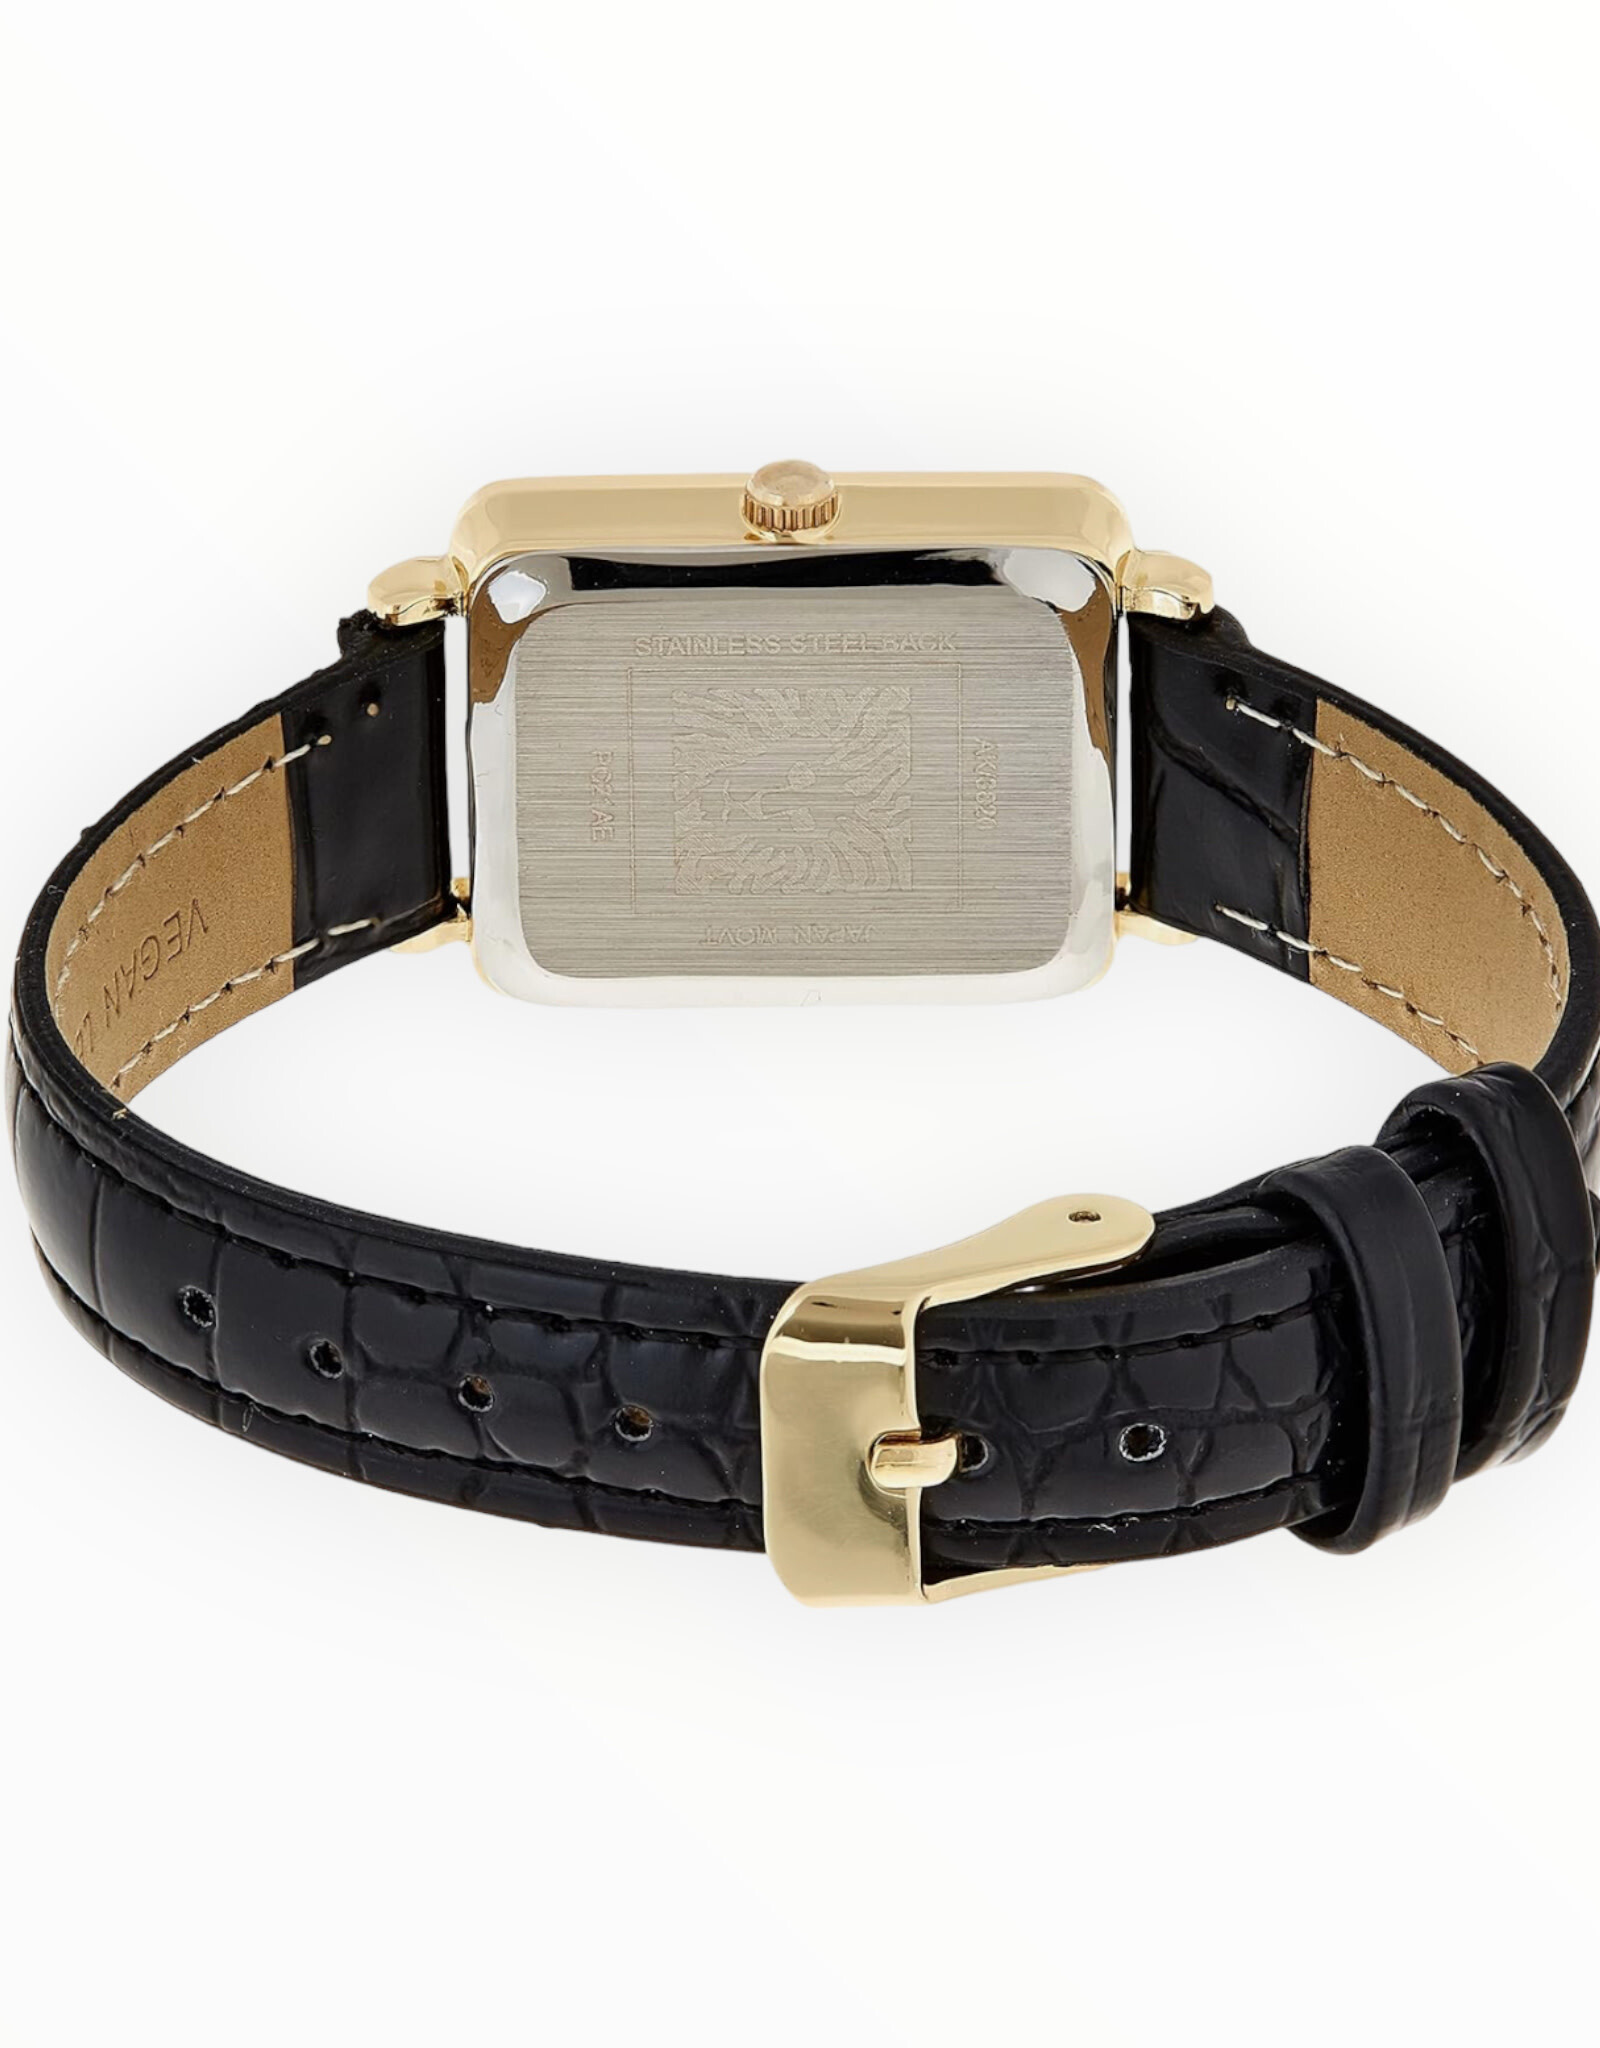 Anne Klein Anne Klein Watch Glitter Accented Glossy Black Dial with Yellow Gold-Tone Case Hand & Markers Black Croco Grain Faux Leather Strap with Buckle Closure